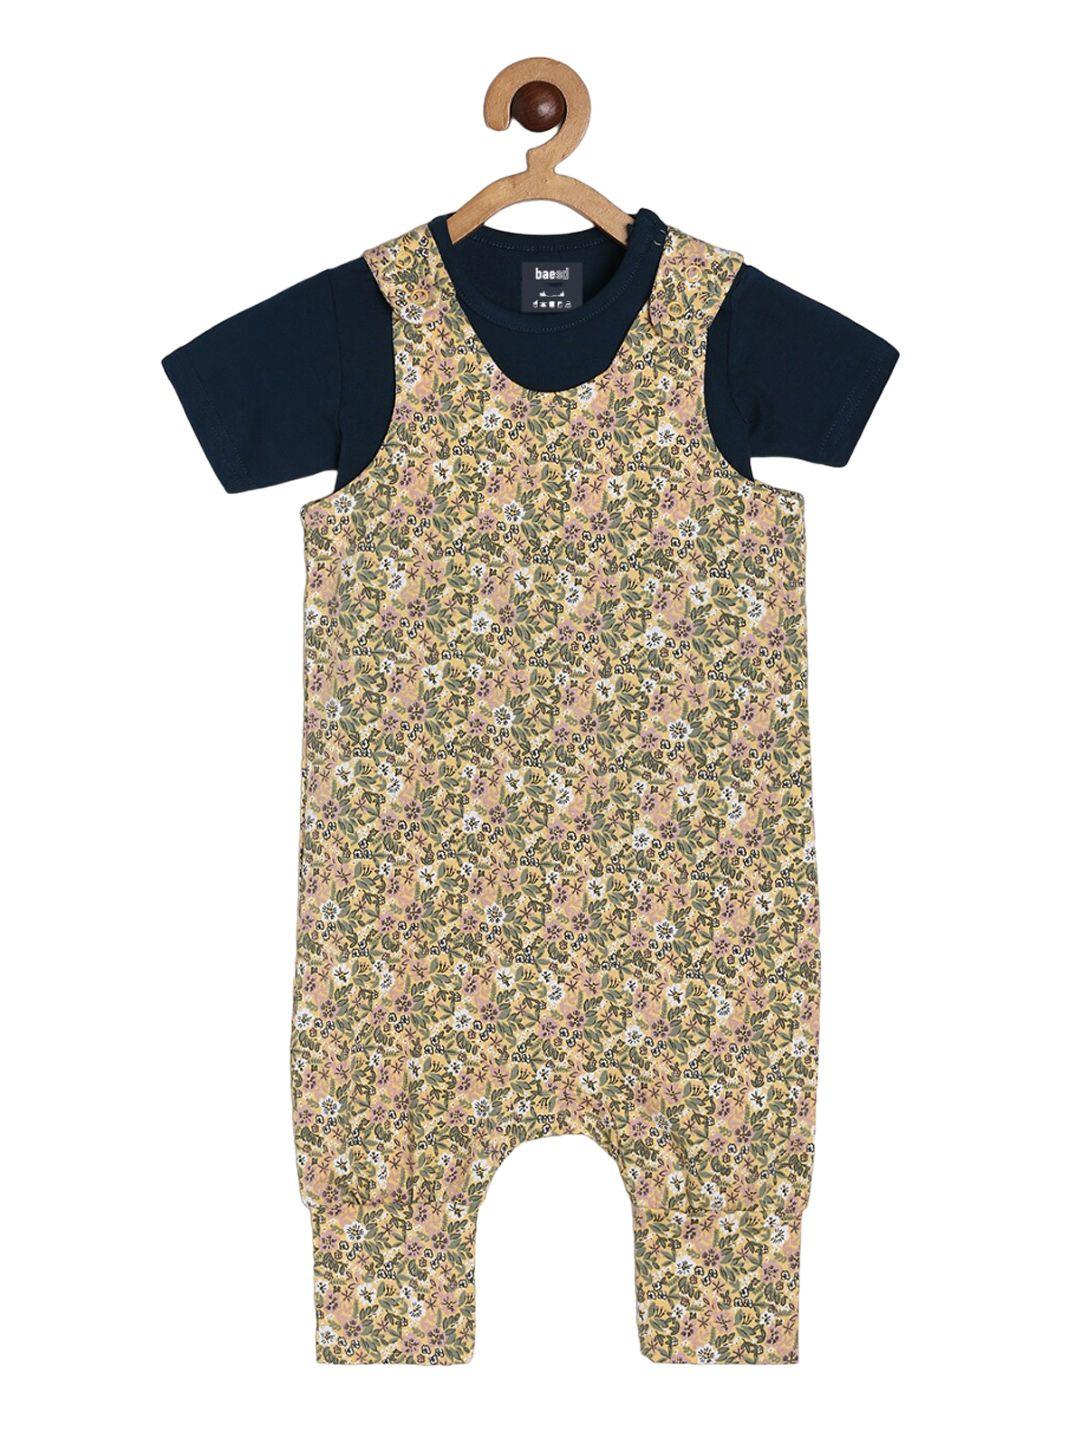 baesd infants printed dungarees with t-shirt